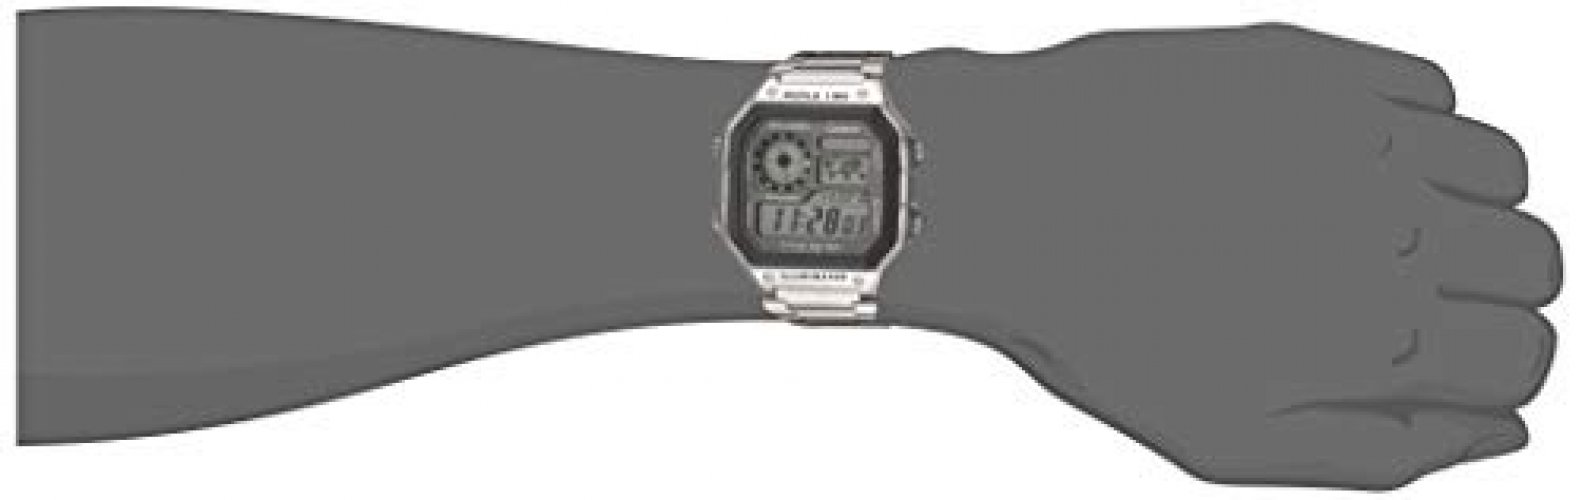 Casio Men's 10-Year Battery Quartz Watch with Stainless Steel Strap and  World Time, Silver, Model AE-1200WHD-7AVCF